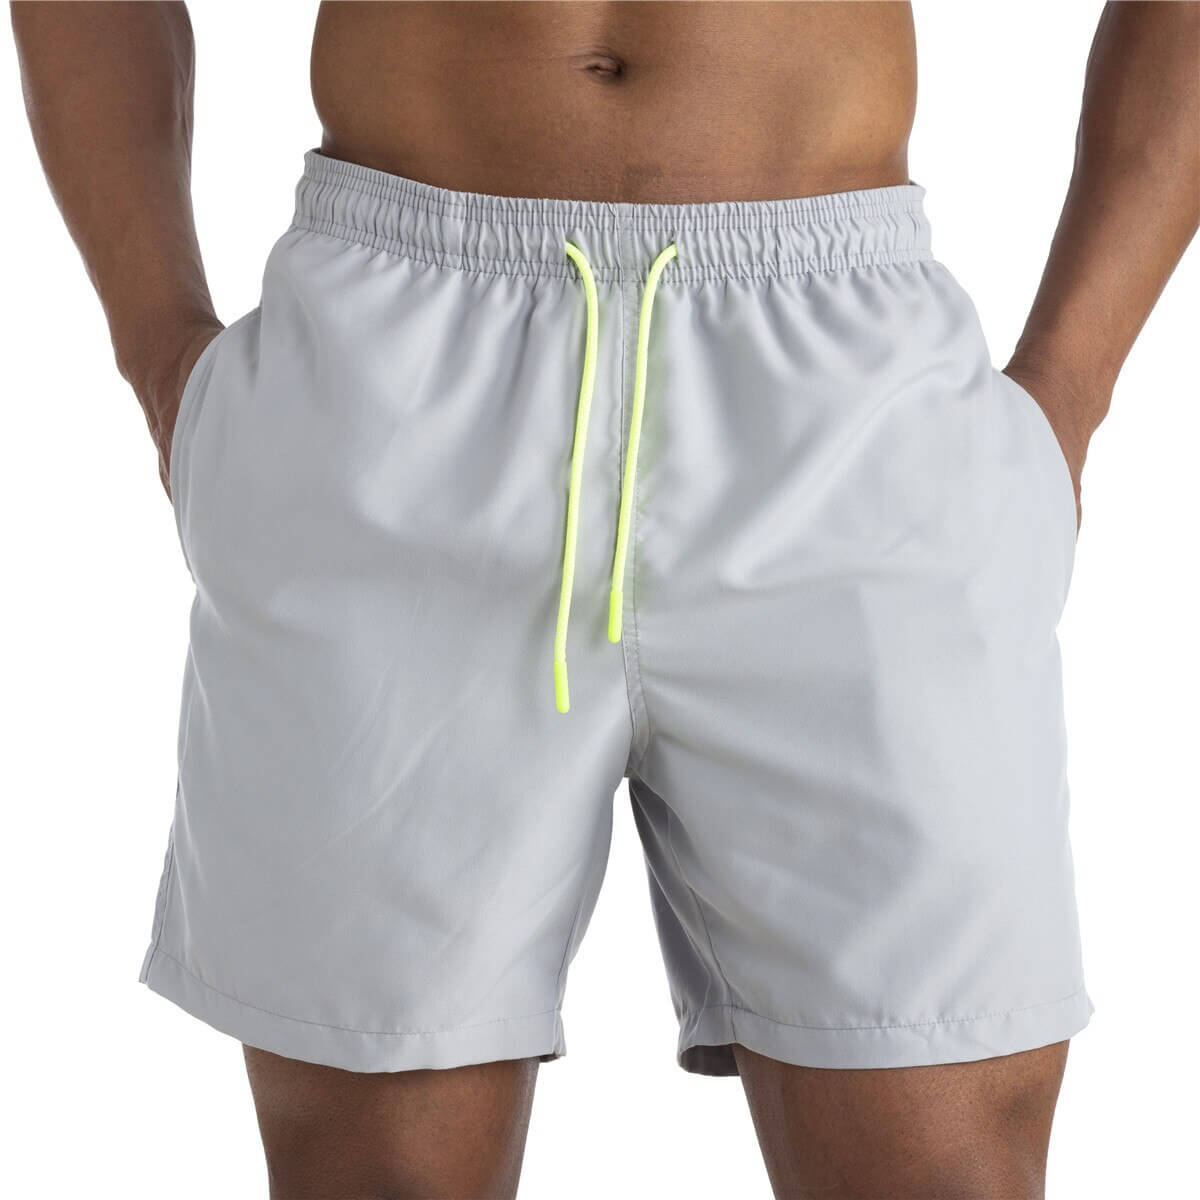 Men's Solid Color Boardshorts with Pockets / Male Swimwear - SF0831